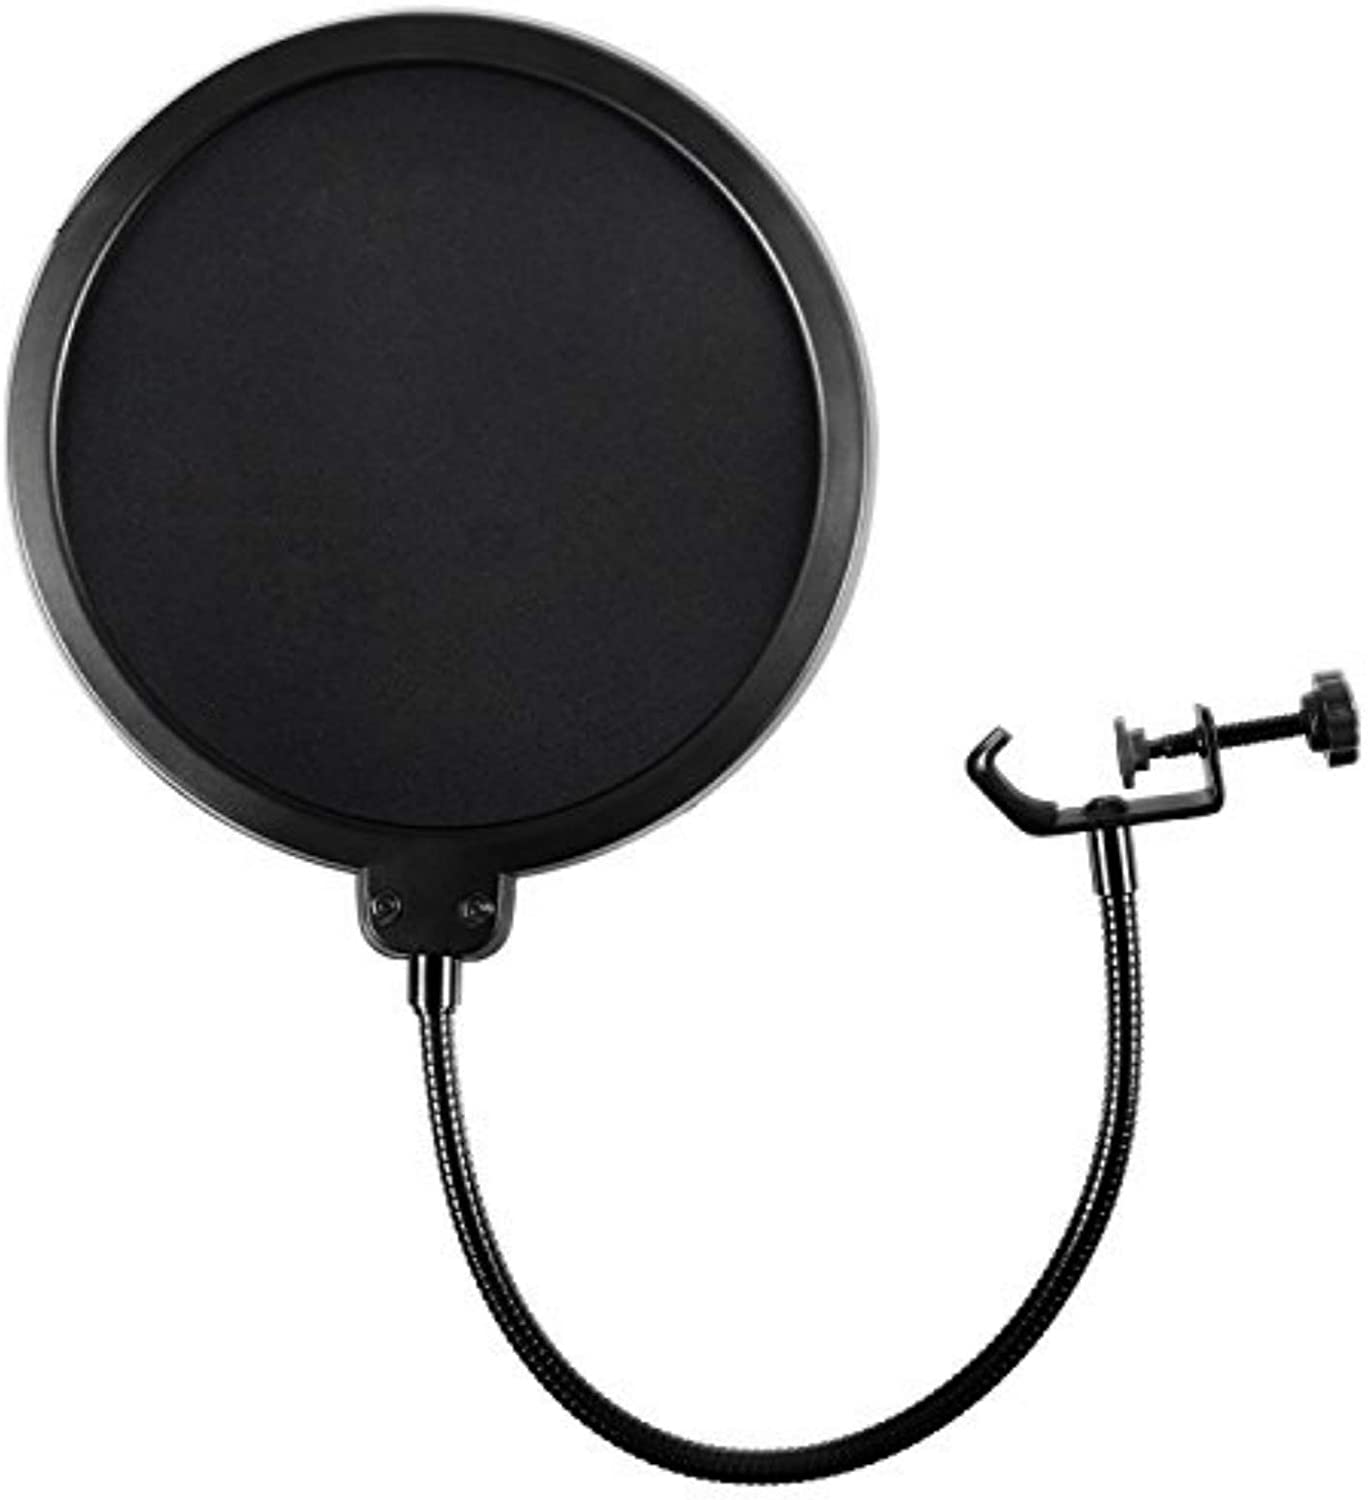 Earamble's pop filter is one of the best-selling pop filters.  Its gooseneck doesn't budge, and it's certainly affordable and durable.